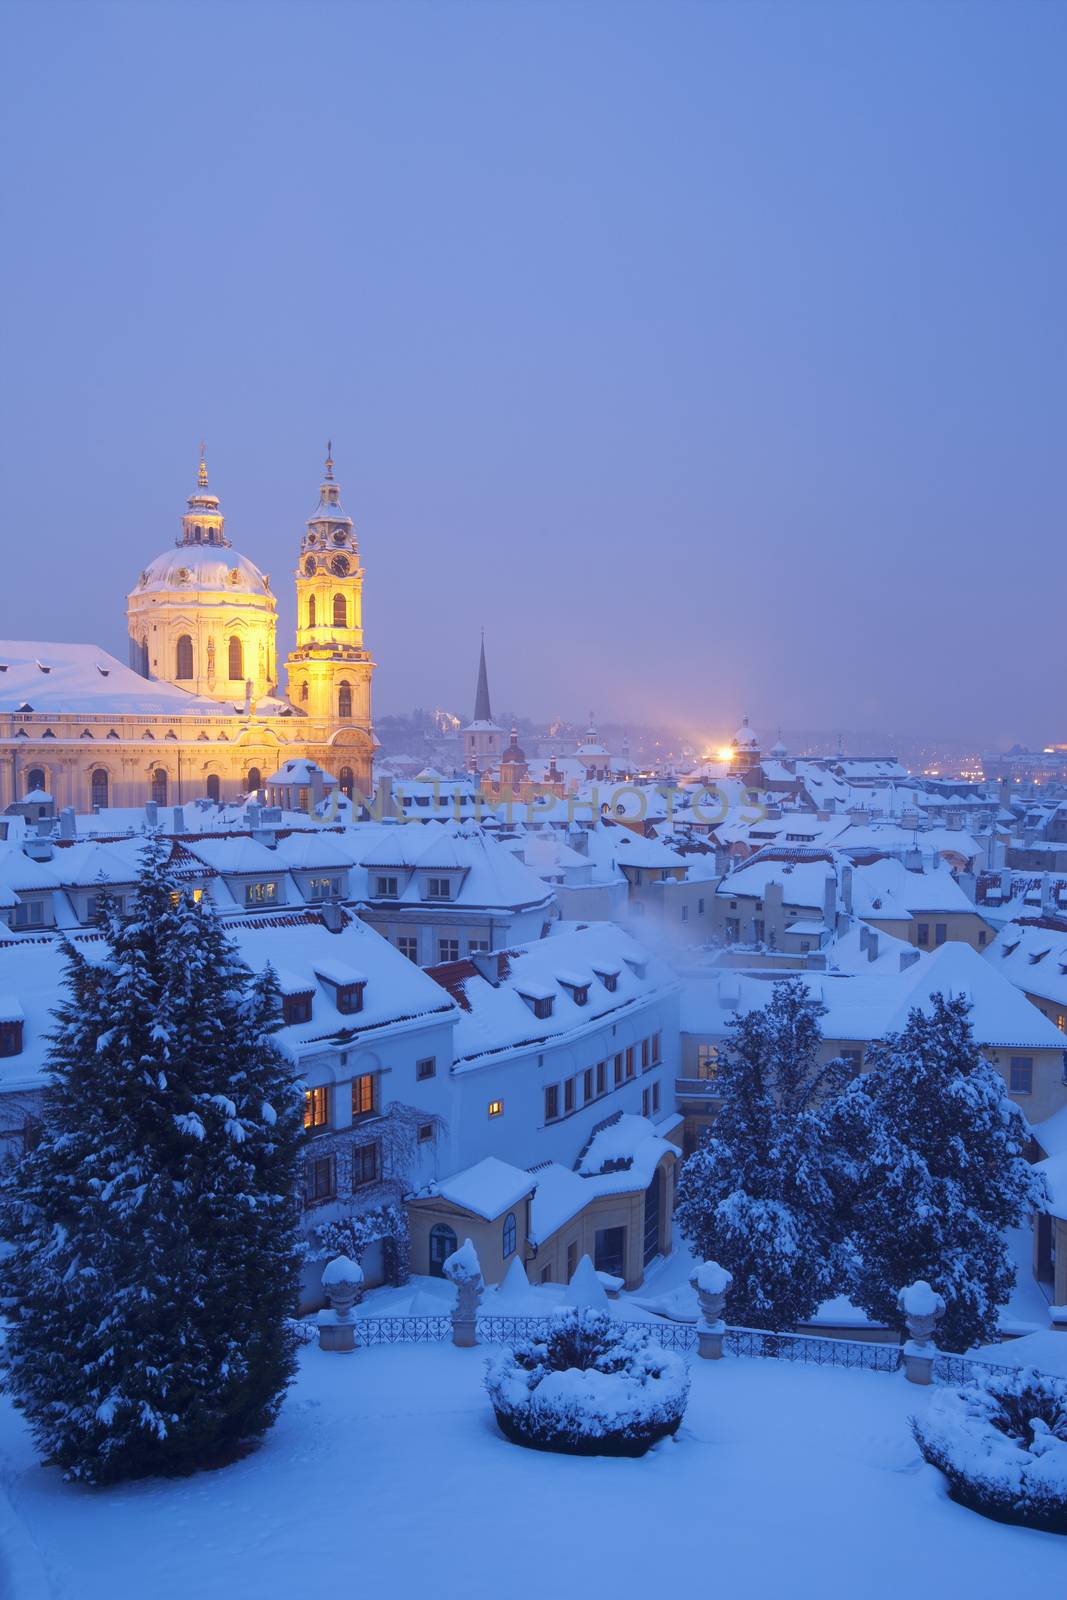 prague - view of hradcany castle and st. nicolaus church in winter